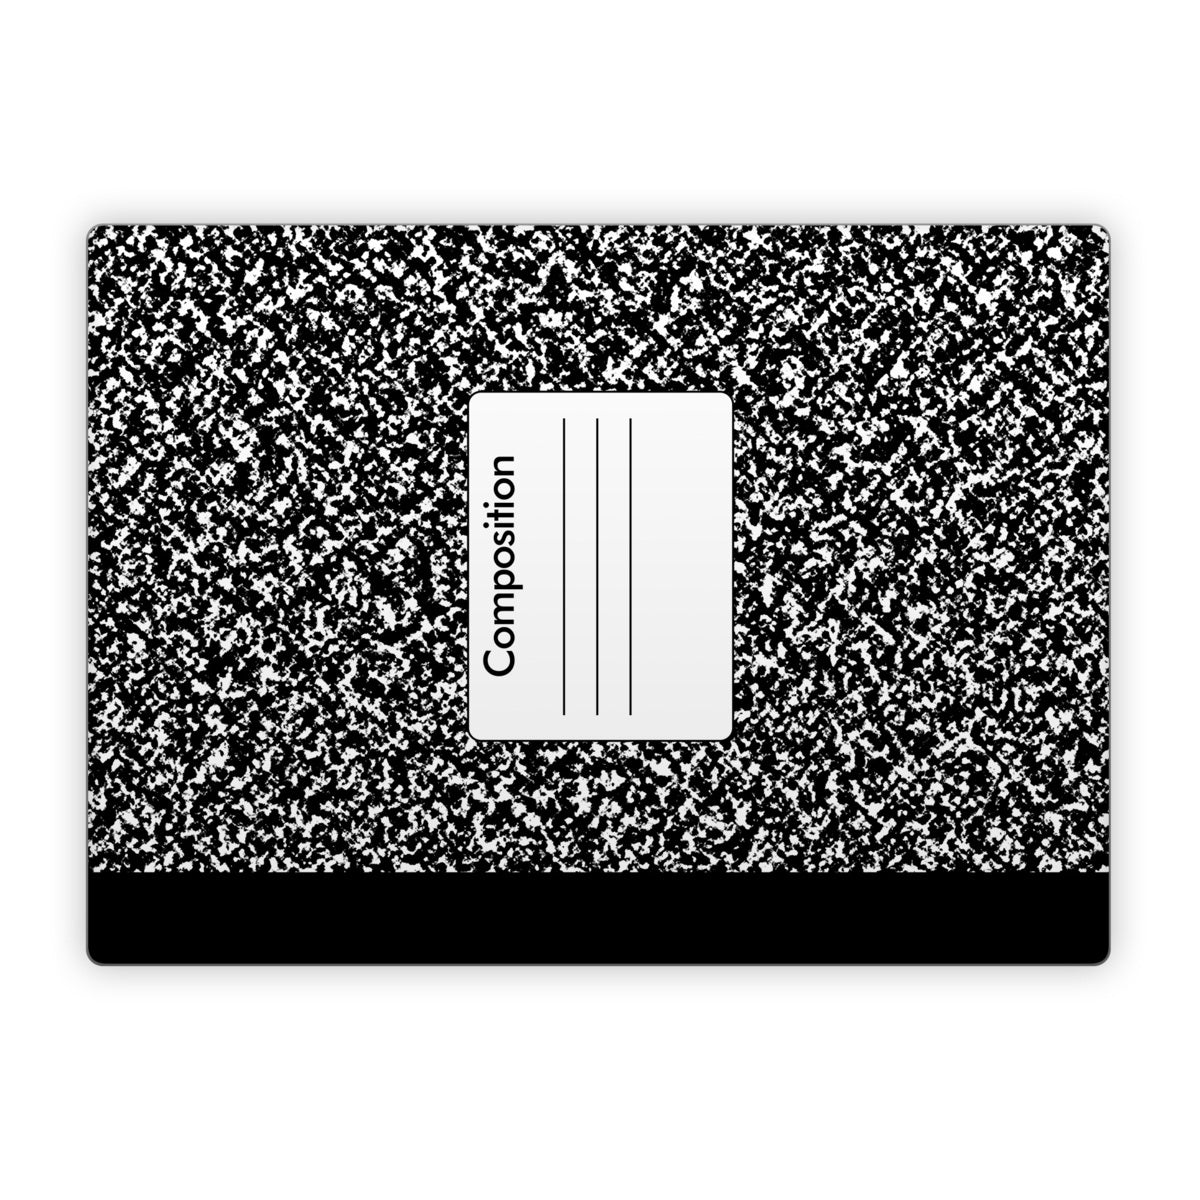 Composition Notebook - Microsoft Surface Laptop Skin